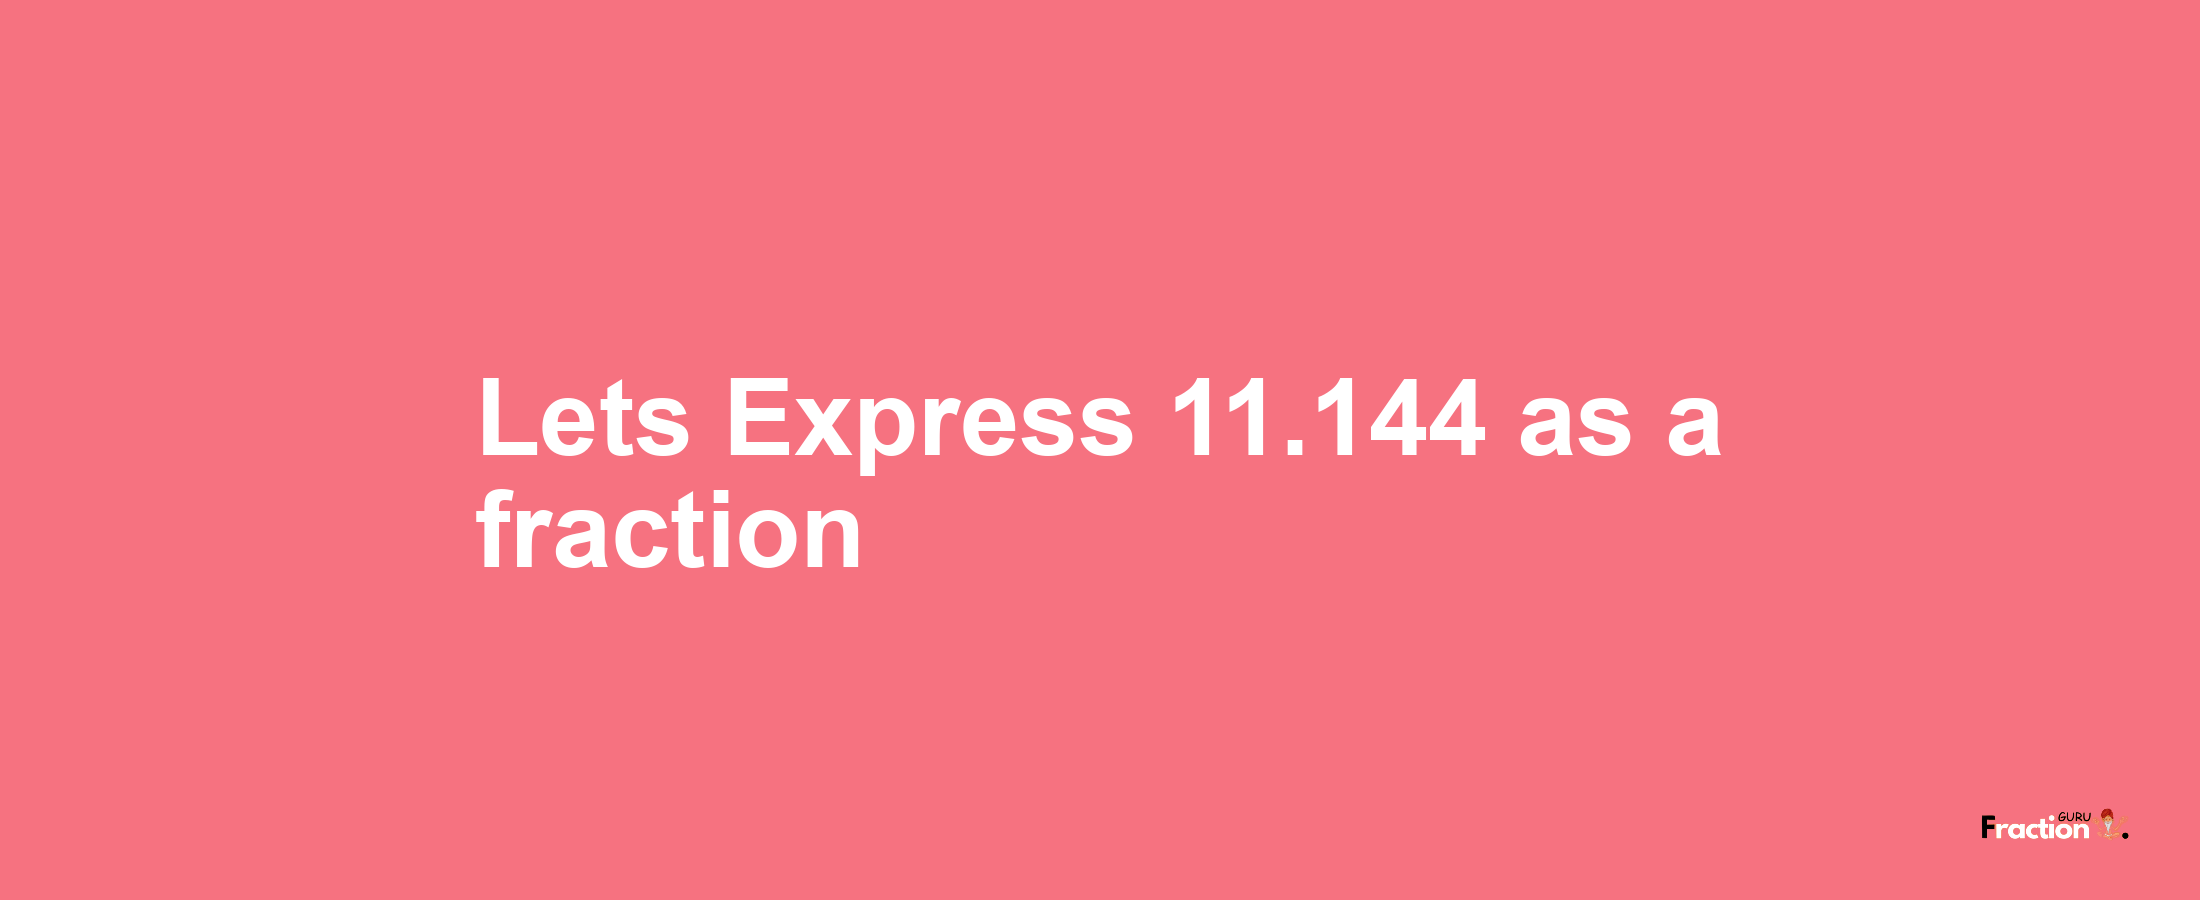 Lets Express 11.144 as afraction